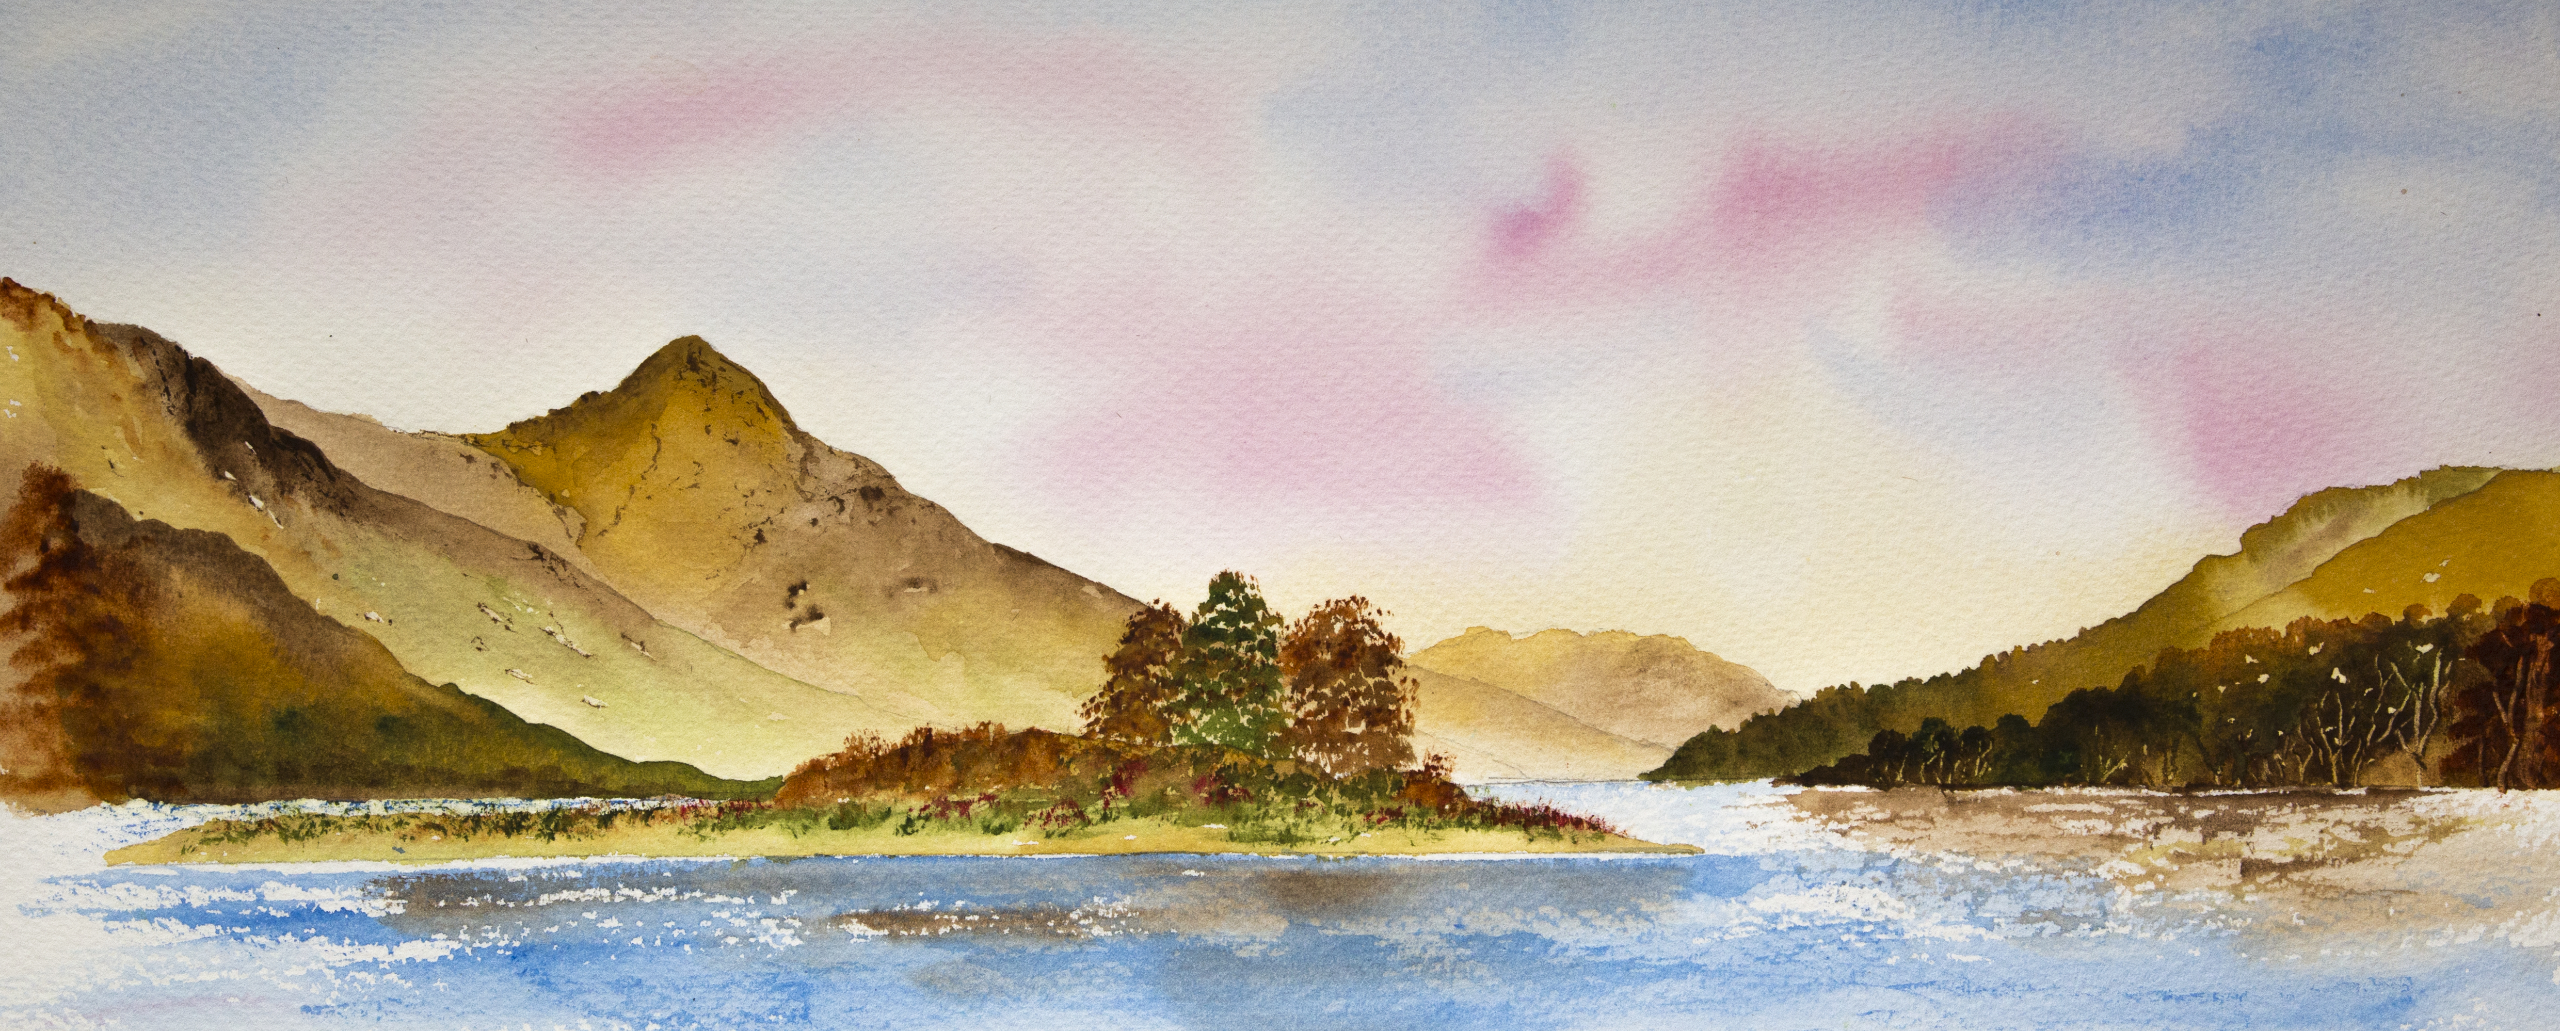 Pap of Glencoe from Kinlochleven watercolour painting